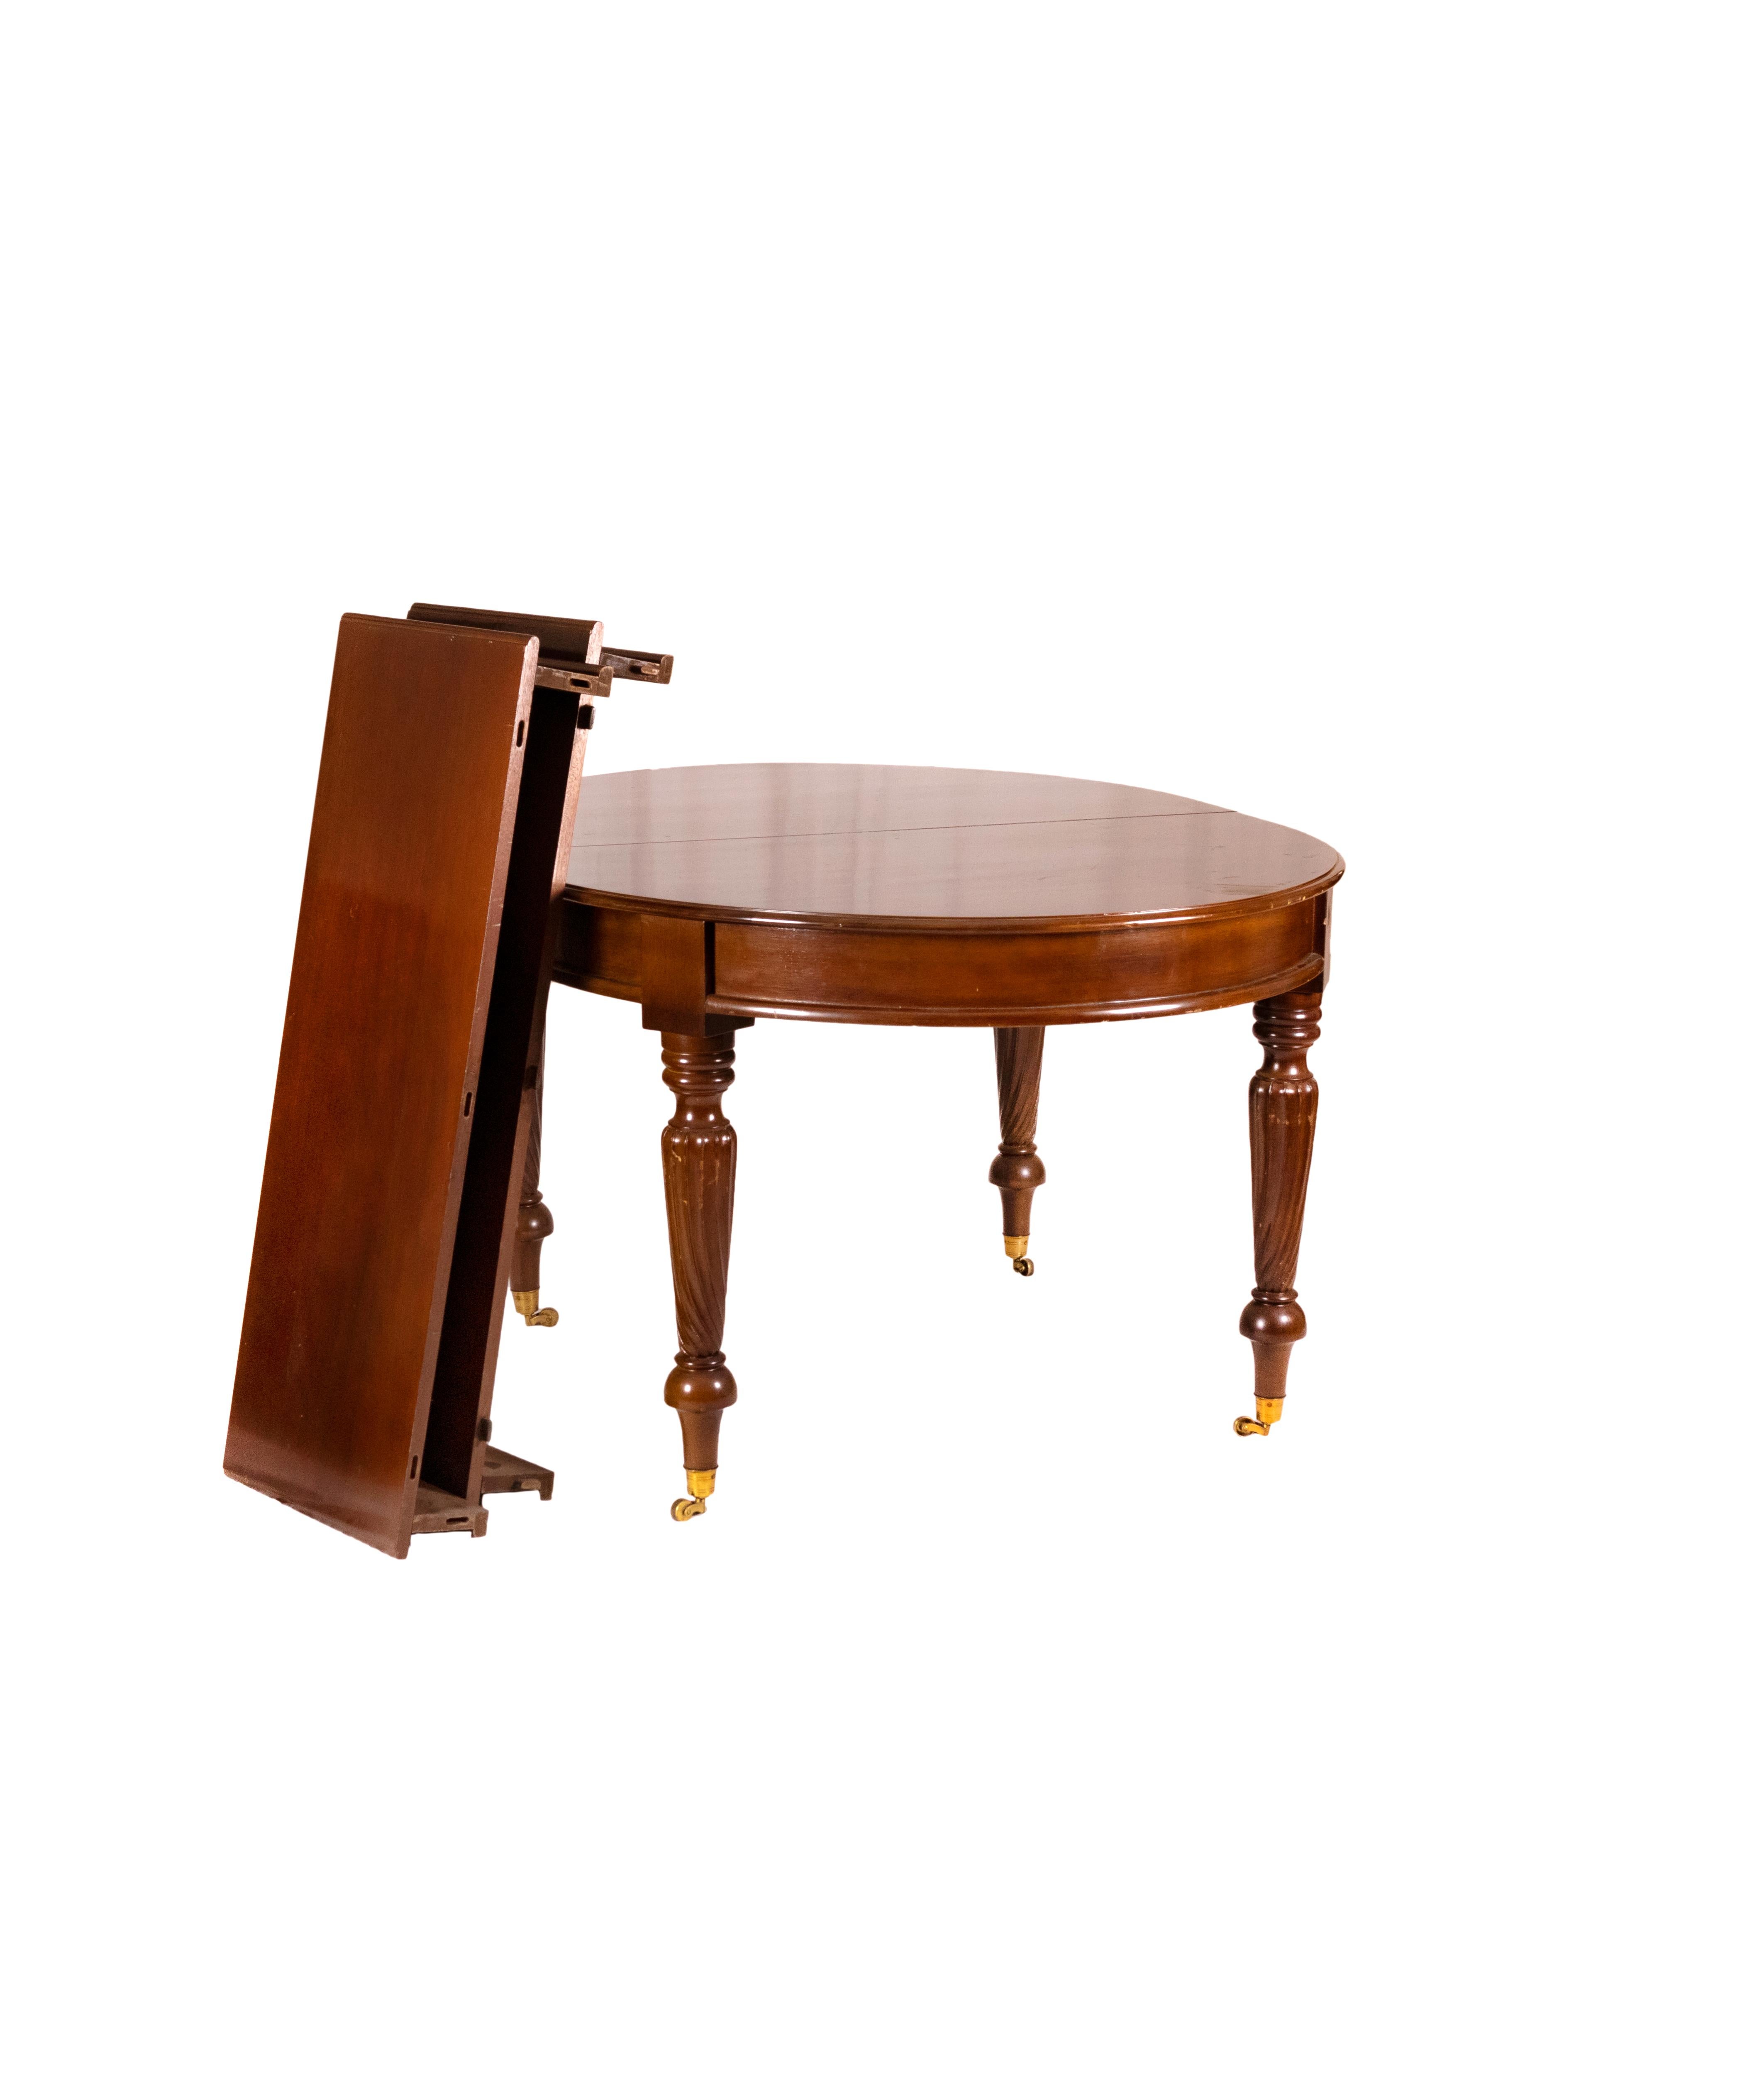 Hand-Crafted Mahogany Dinning Table With Extensions, 19th Century For Sale